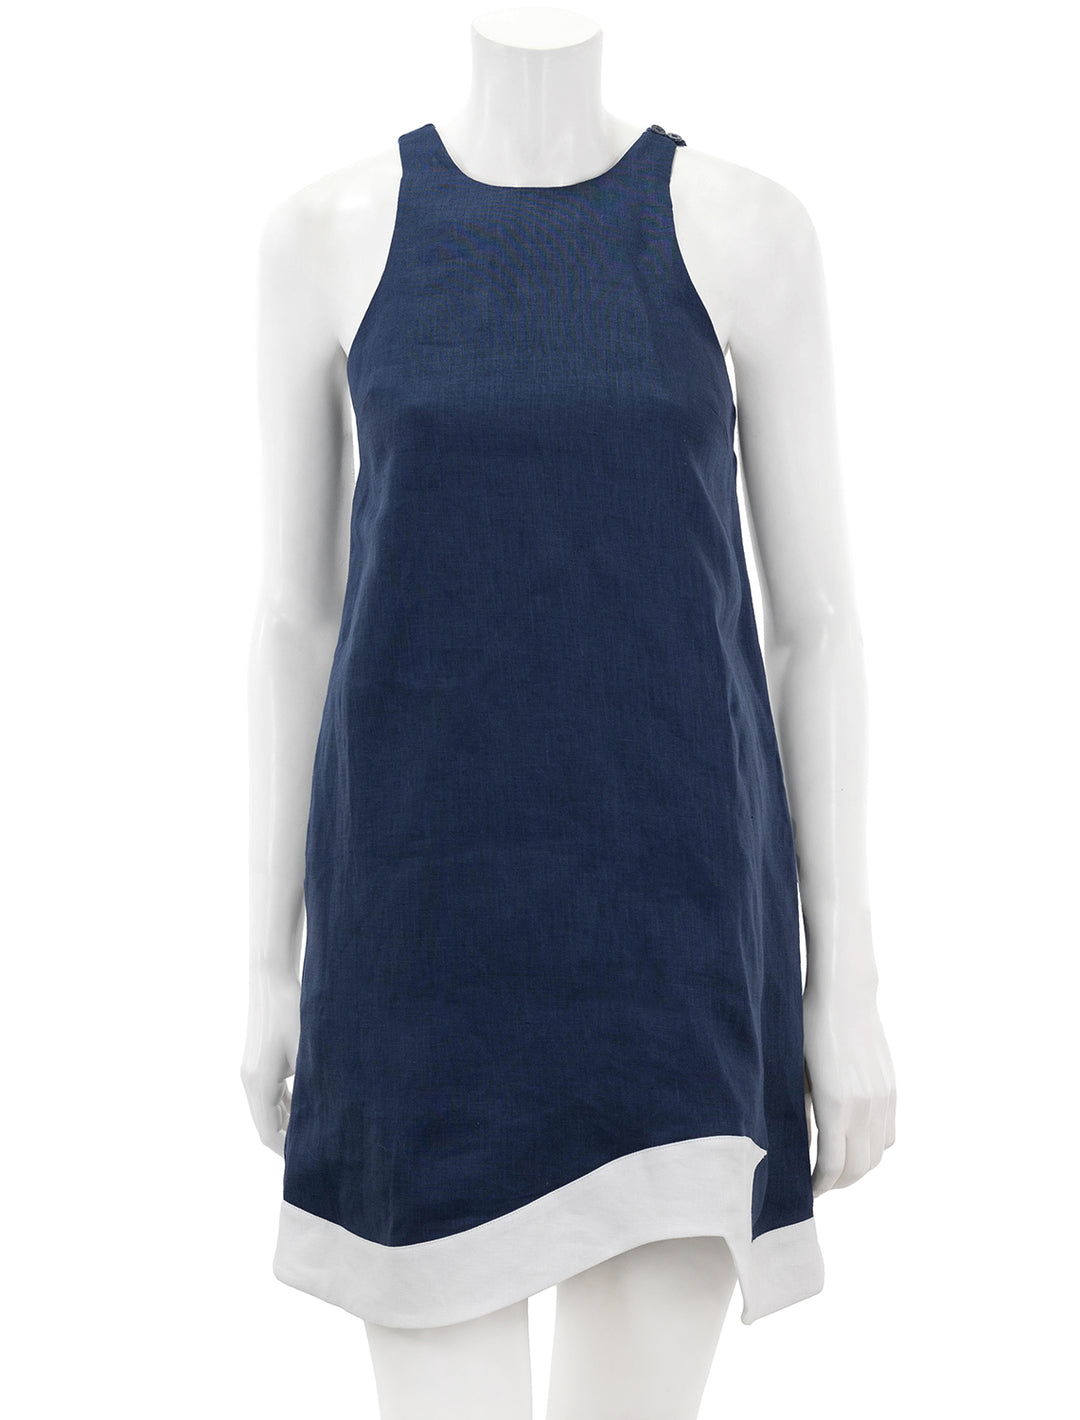 Front view of STAUD's allori dress in navy and white.